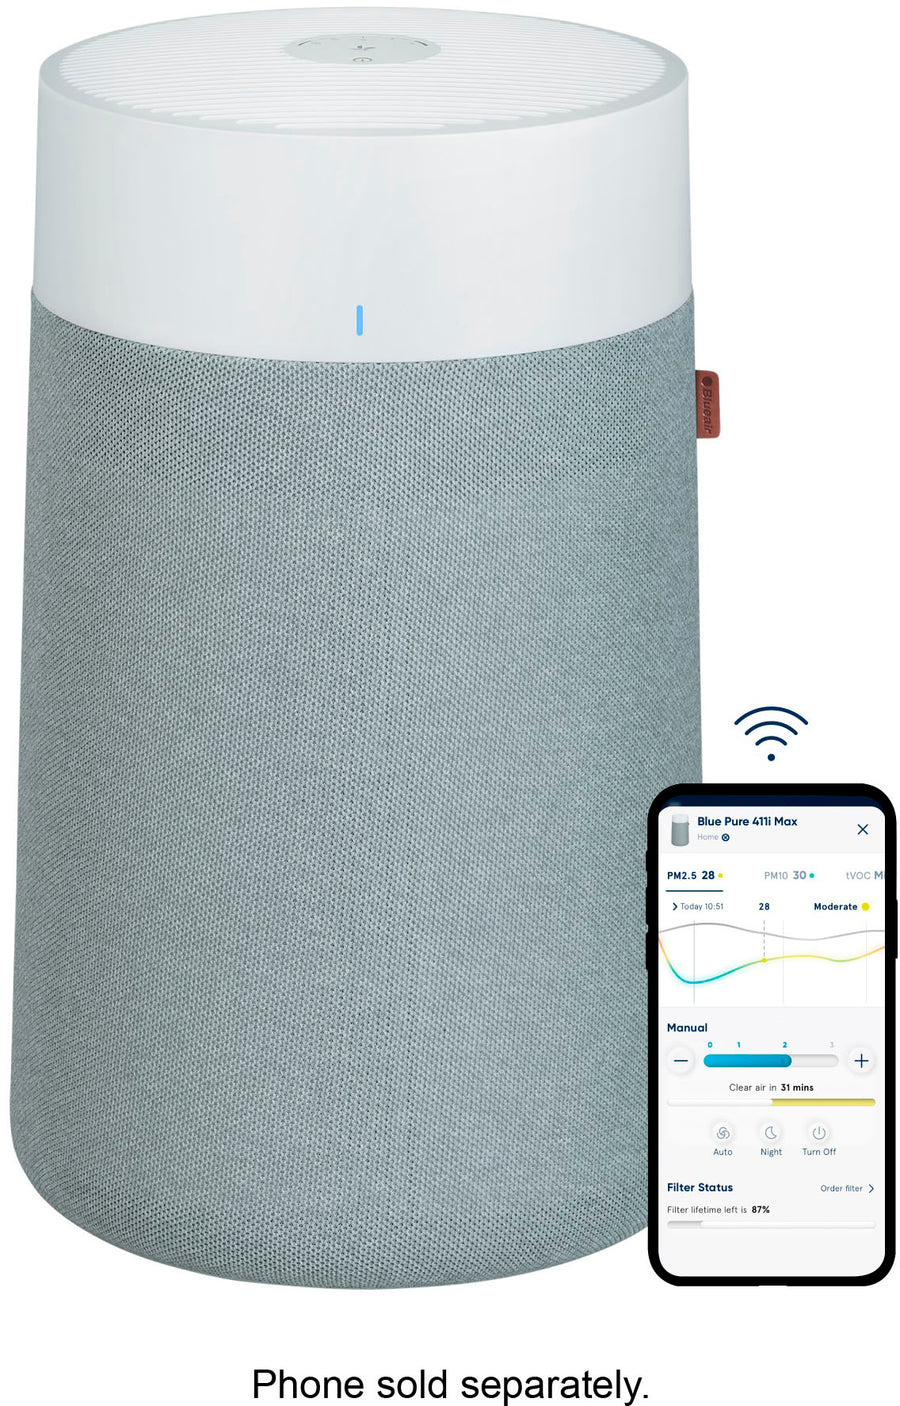 Blueair - Blue Pure 411i Max 219 Sq. Ft HEPASilent Smart Small Room Bedroom Air Purifier - White/Gray_0